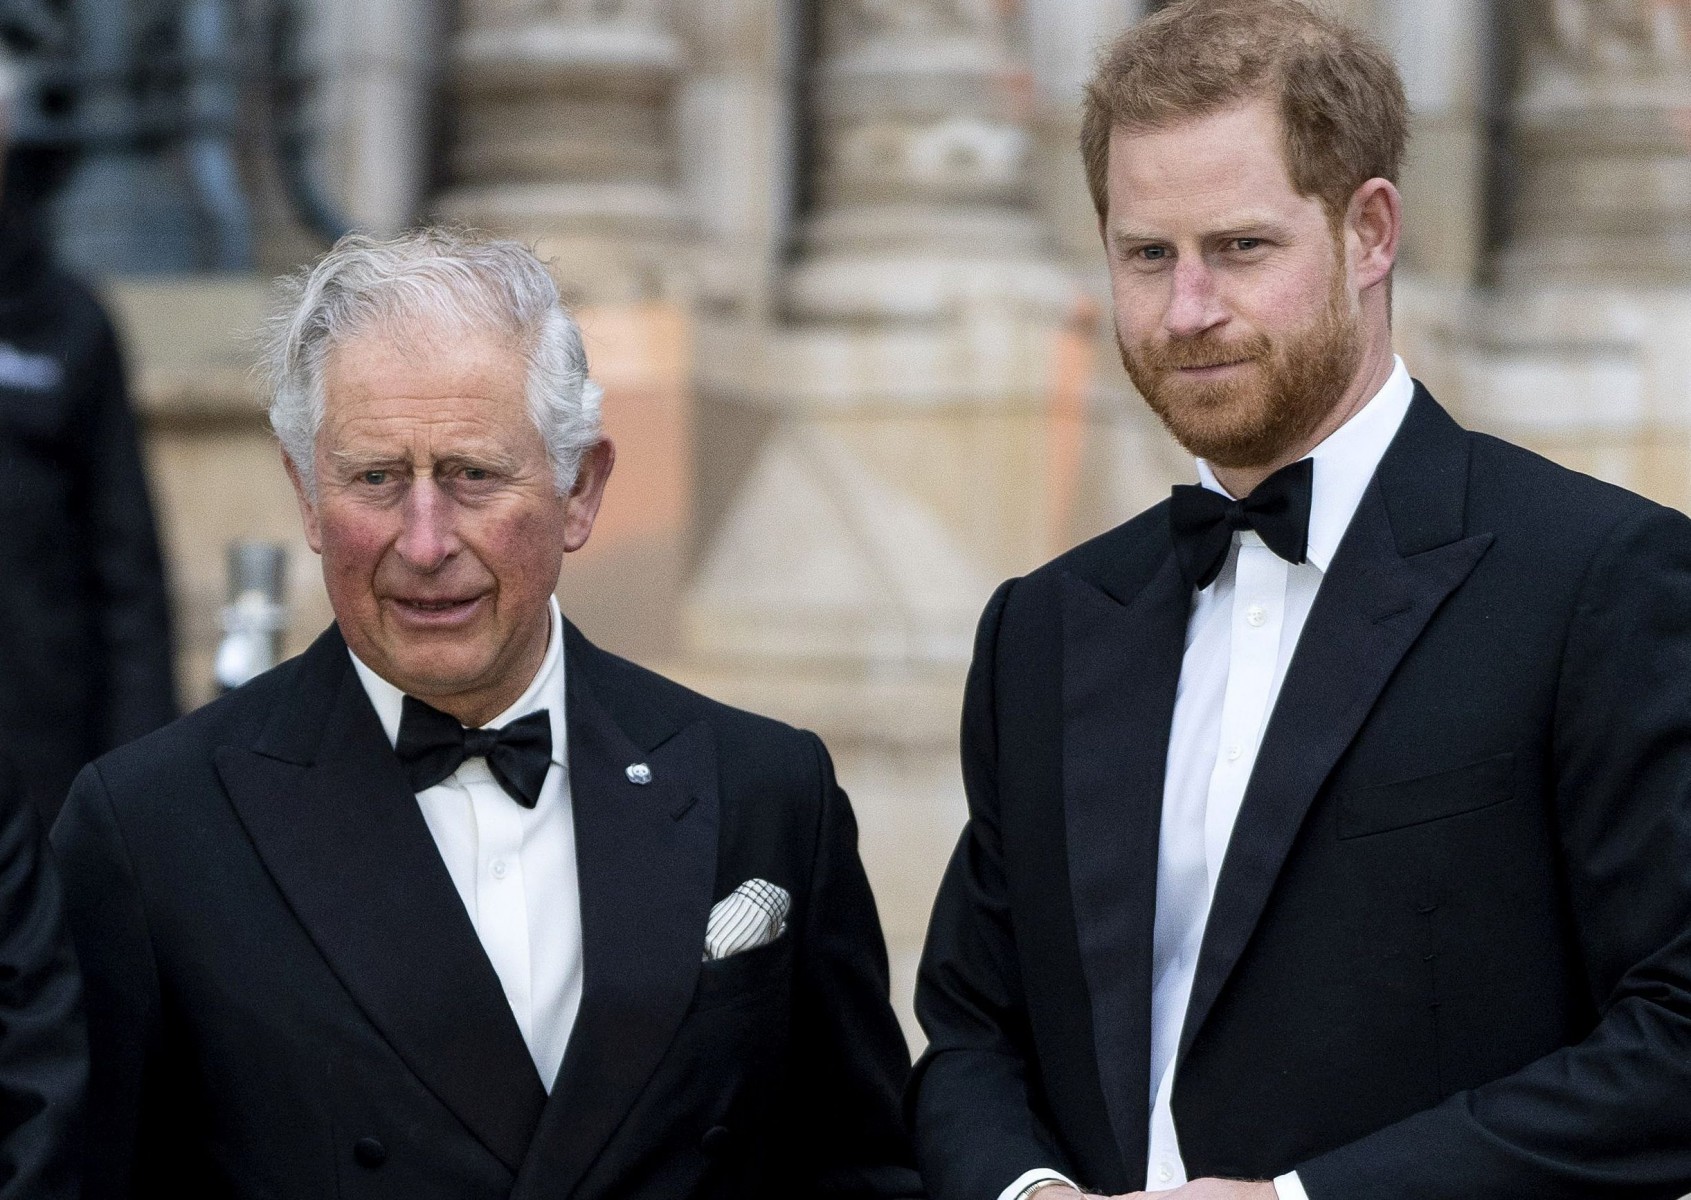 Prince Charles will also continue to fund Prince Harry privately